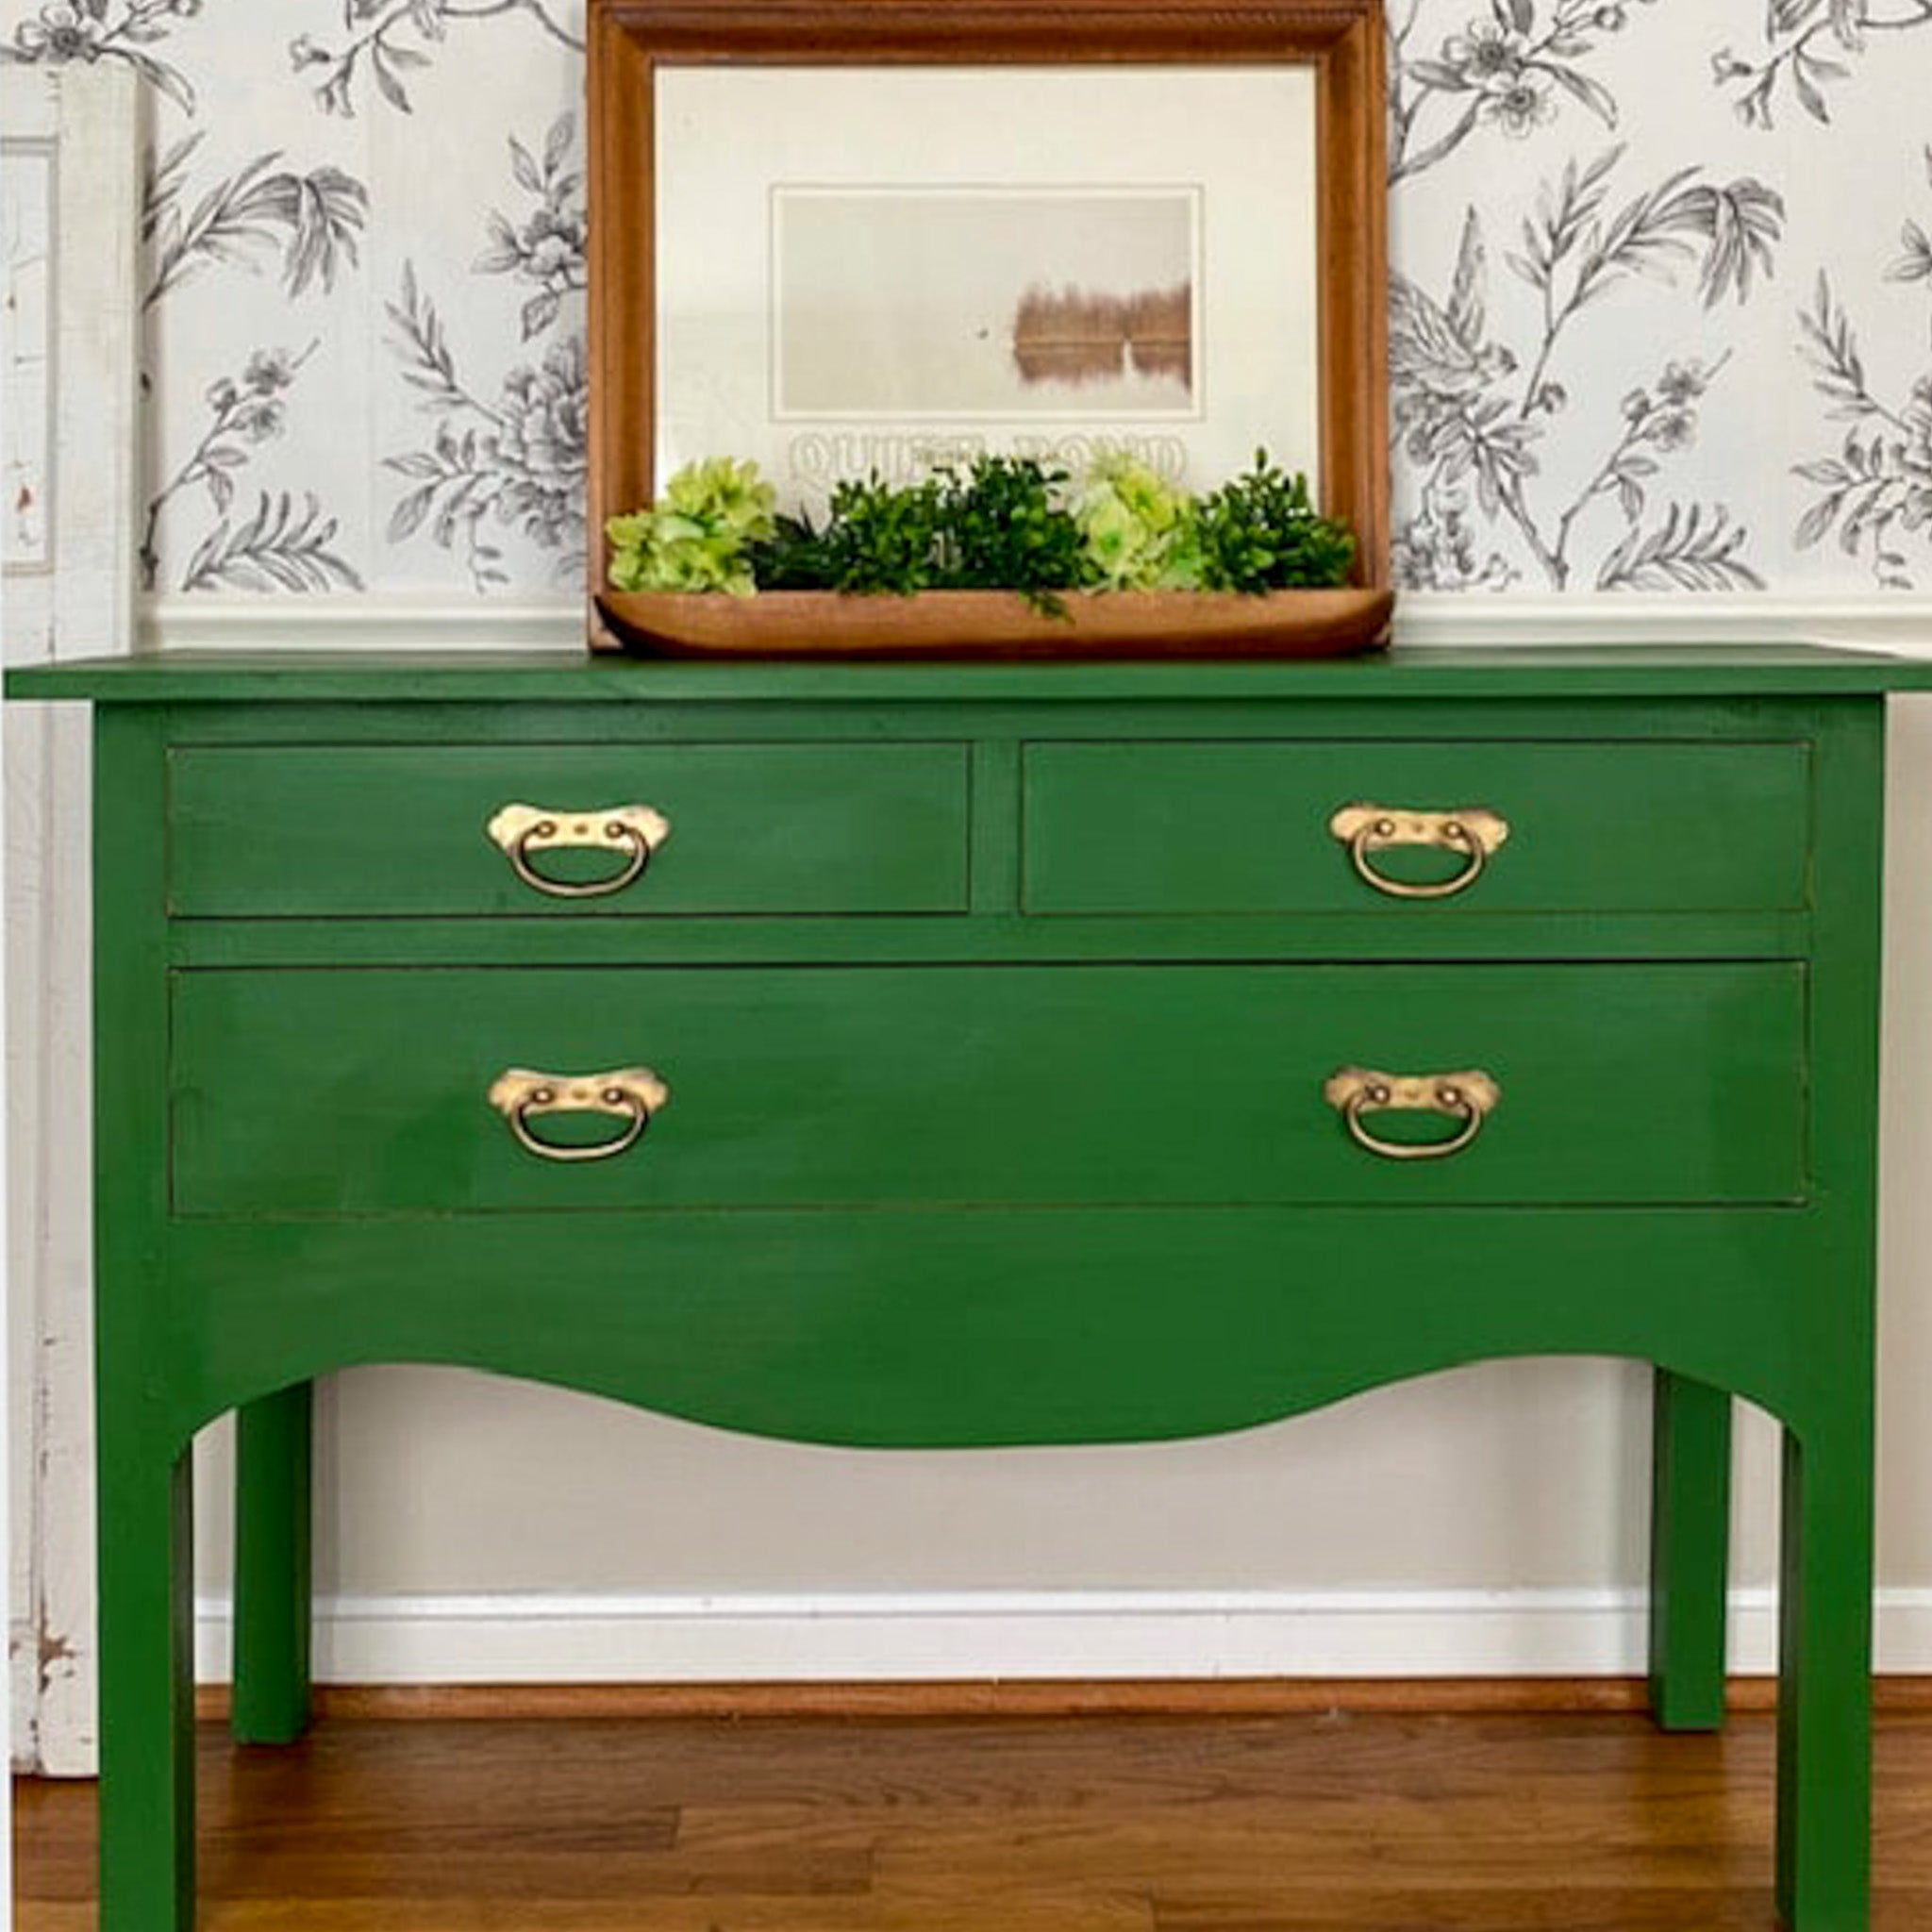 A vintage 3-drawer entry-way table is painted in Dixie Belle's Evergreen chalk mineral paint.